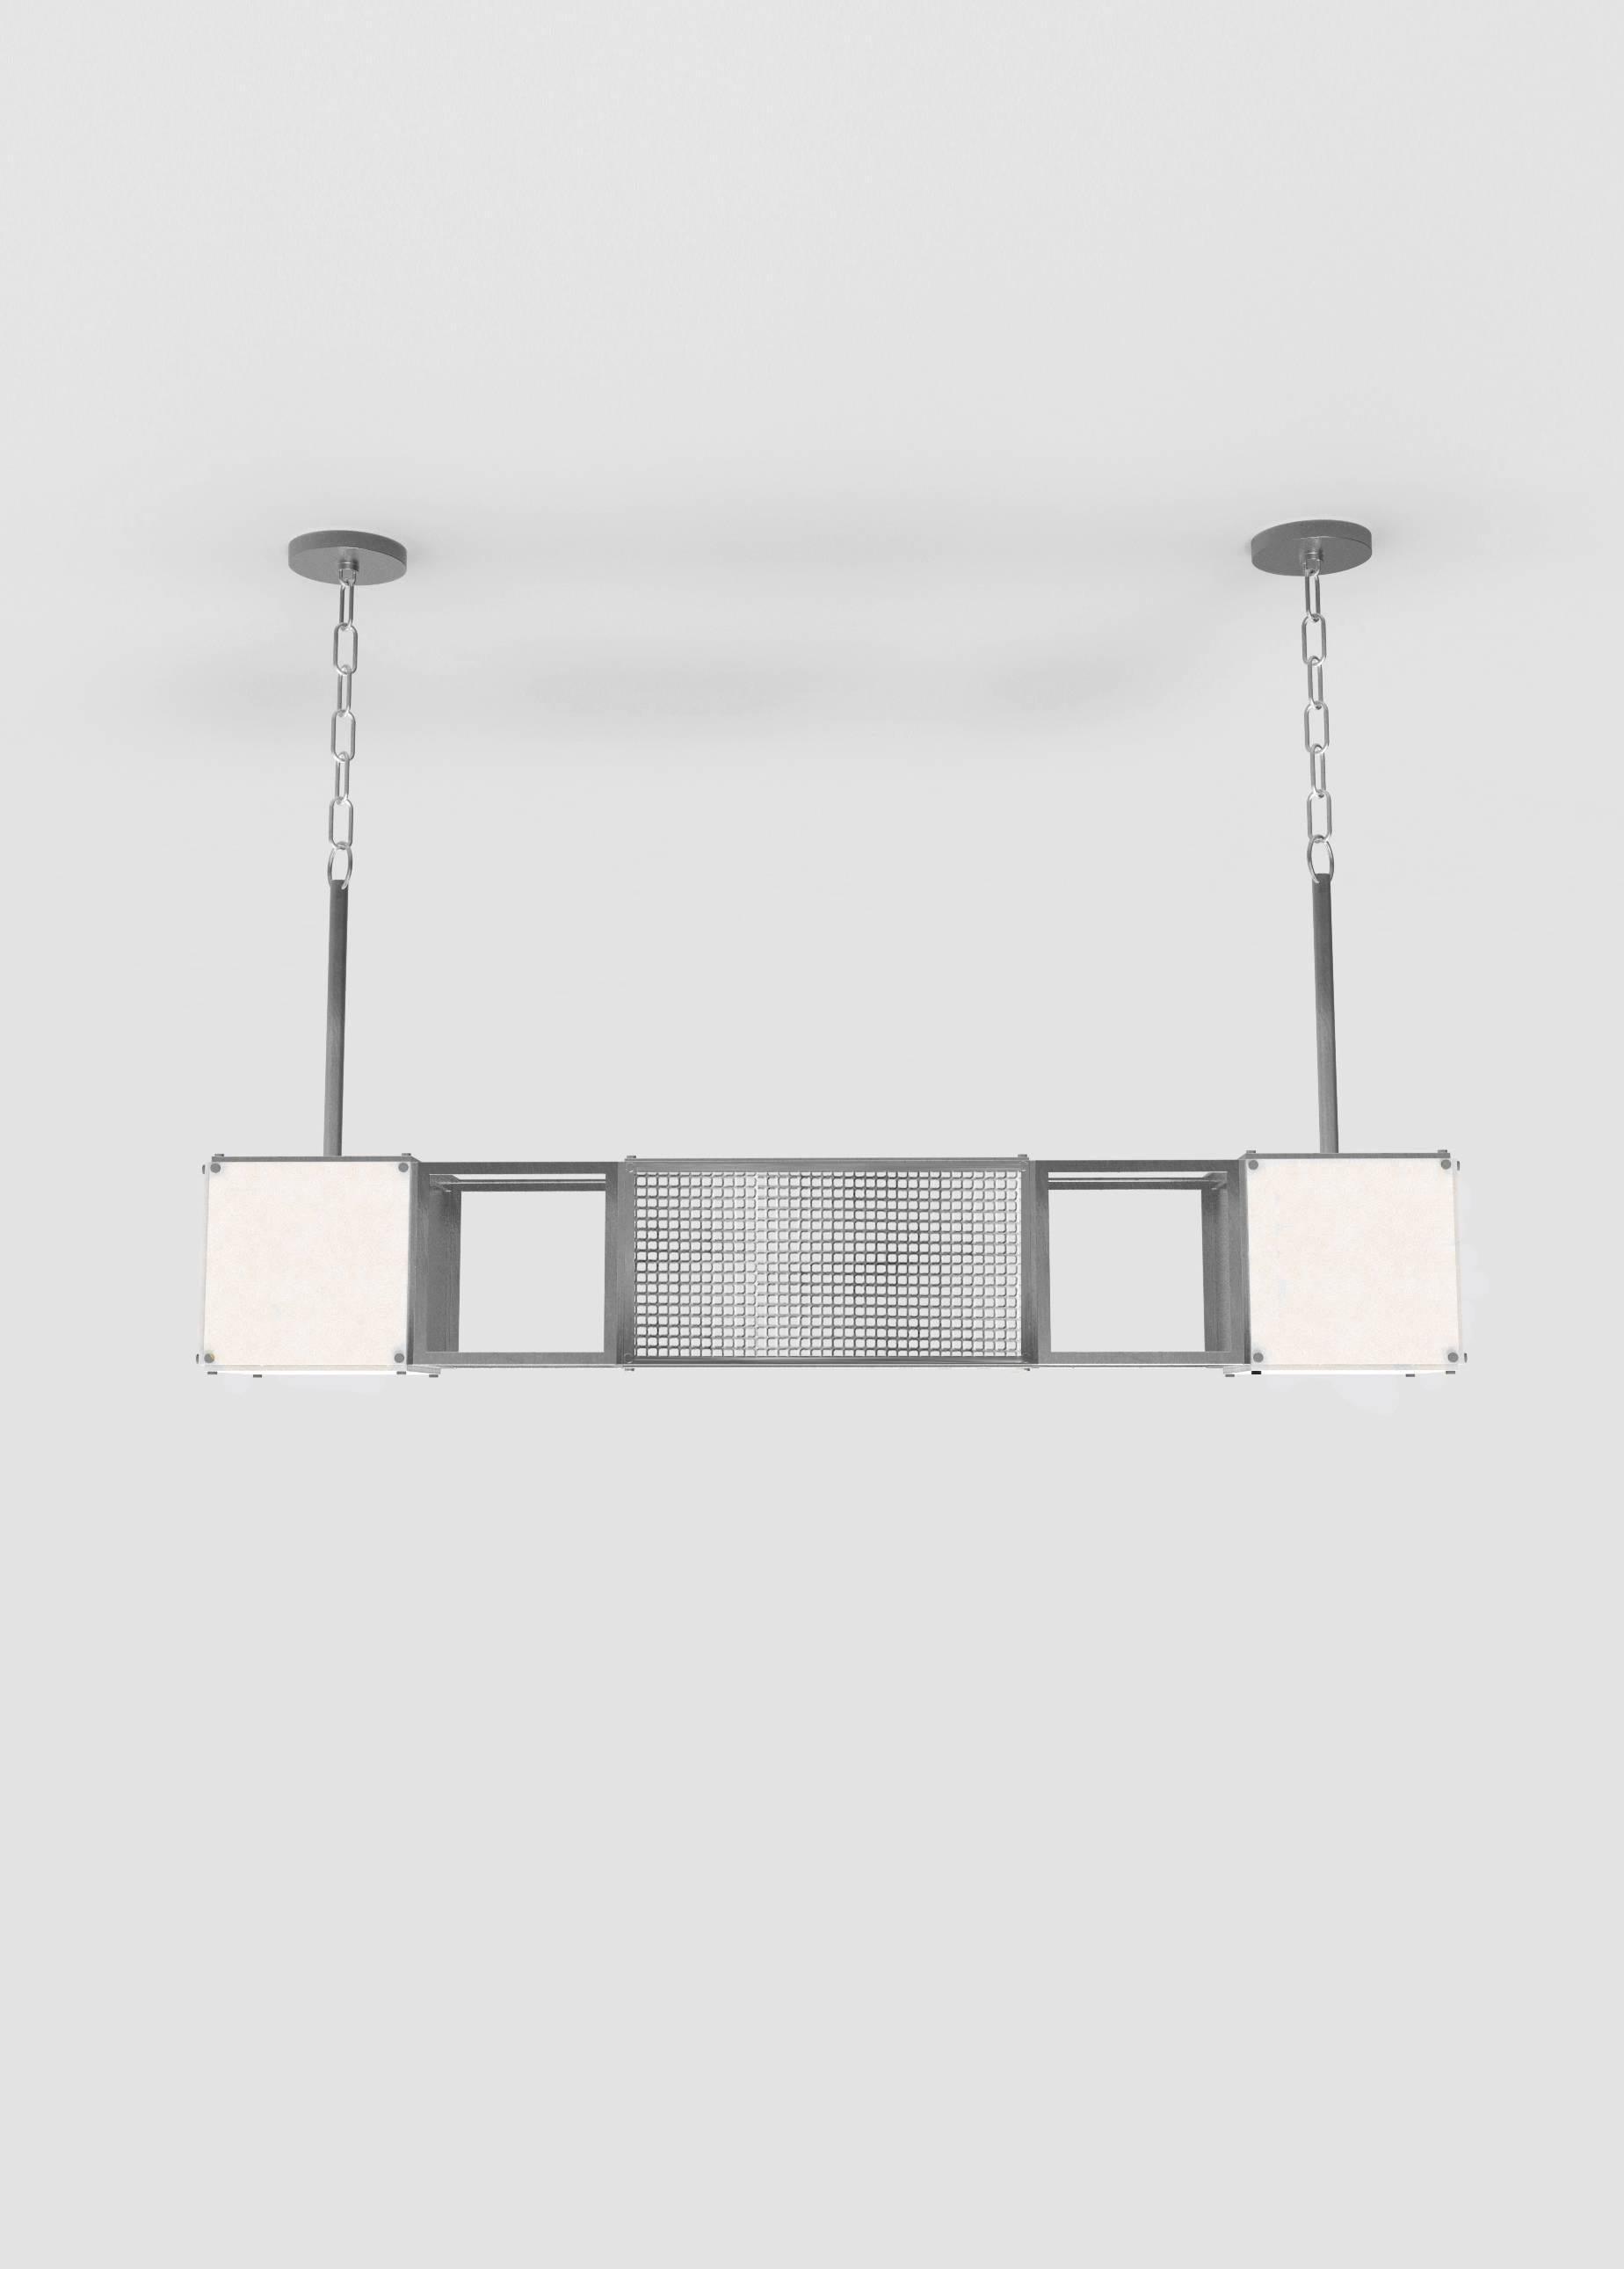 This contemporary light made of brushed nickel and alabaster is part of the Orphan Work brand and can be used as a horizontal or vertical ceiling pendant. 

ORPHAN WORK is a new identity for lost designs from Material Lust’s own archive. We have